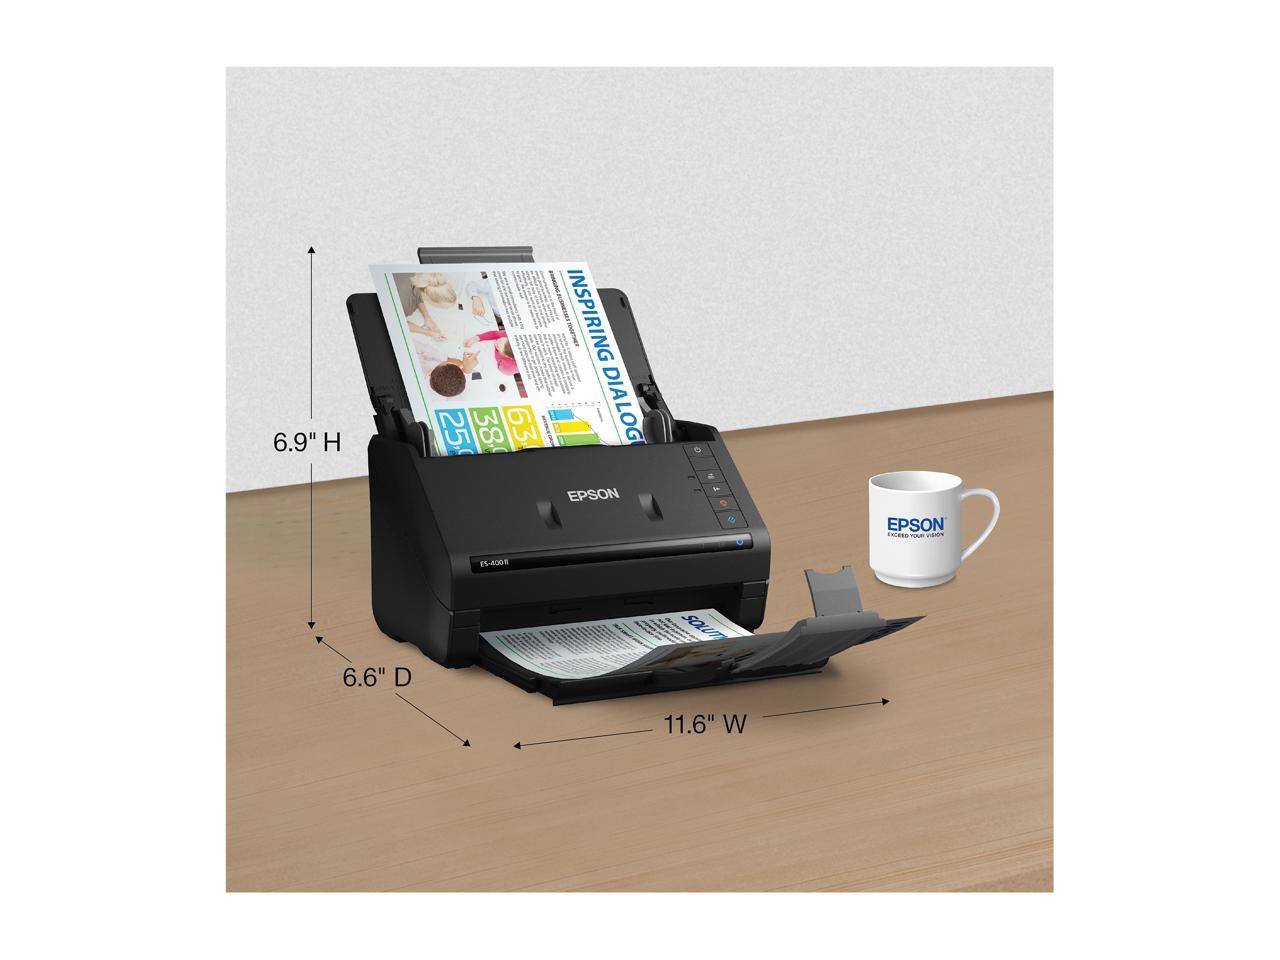 Epson Workforce Es 400 Ii Color Duplex Desktop Document Scanner For Pc And Mac With Auto 9516